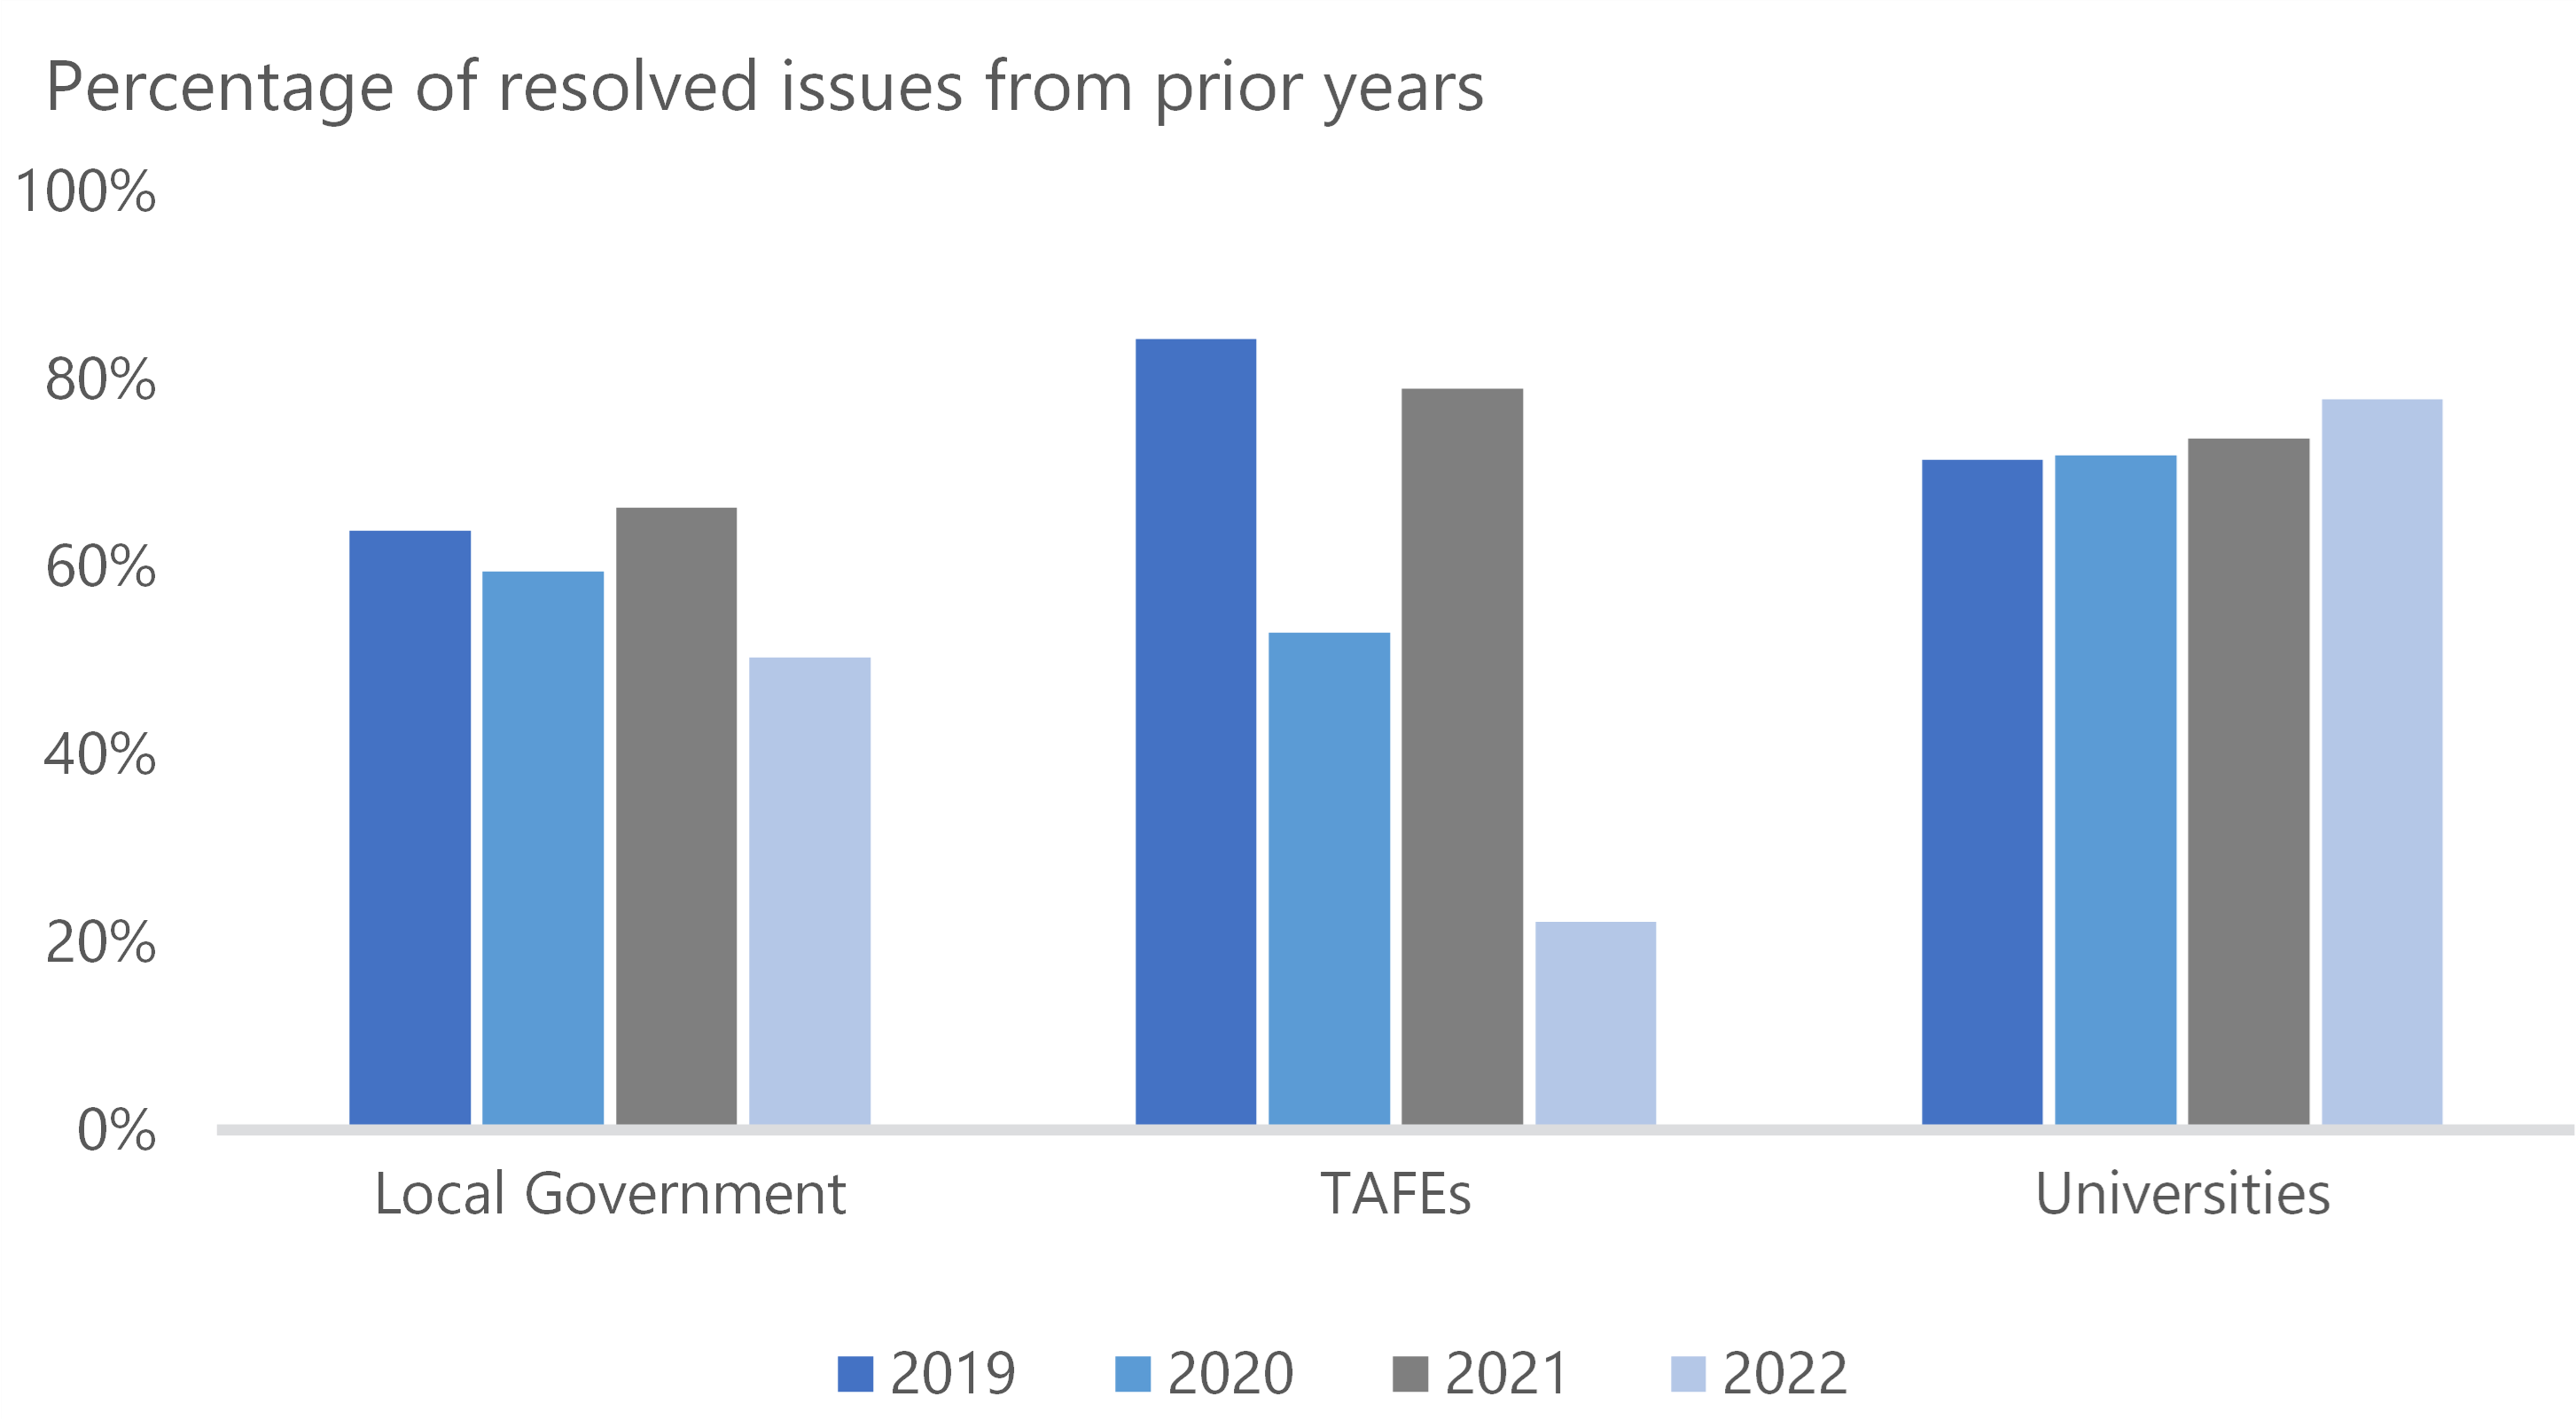 A bar chart that shows, for the years 2019 to 2022, the percentage of issues that have been resolved from prior years. For local government, they start at a bit over 60% in 2019, drop to just below 60% in 2020, rise again to nearly 70% in 2021, then drop to around 50% in 2022. For TAFEs, they start at over 80% in 2019, drop to about 50% in 2020, rise to about 75% in 2021, then drop to about 20% in 2022. For universities, they start at about 70% in 2019 and rise in each of the following years to a bit below 80% in 2022.